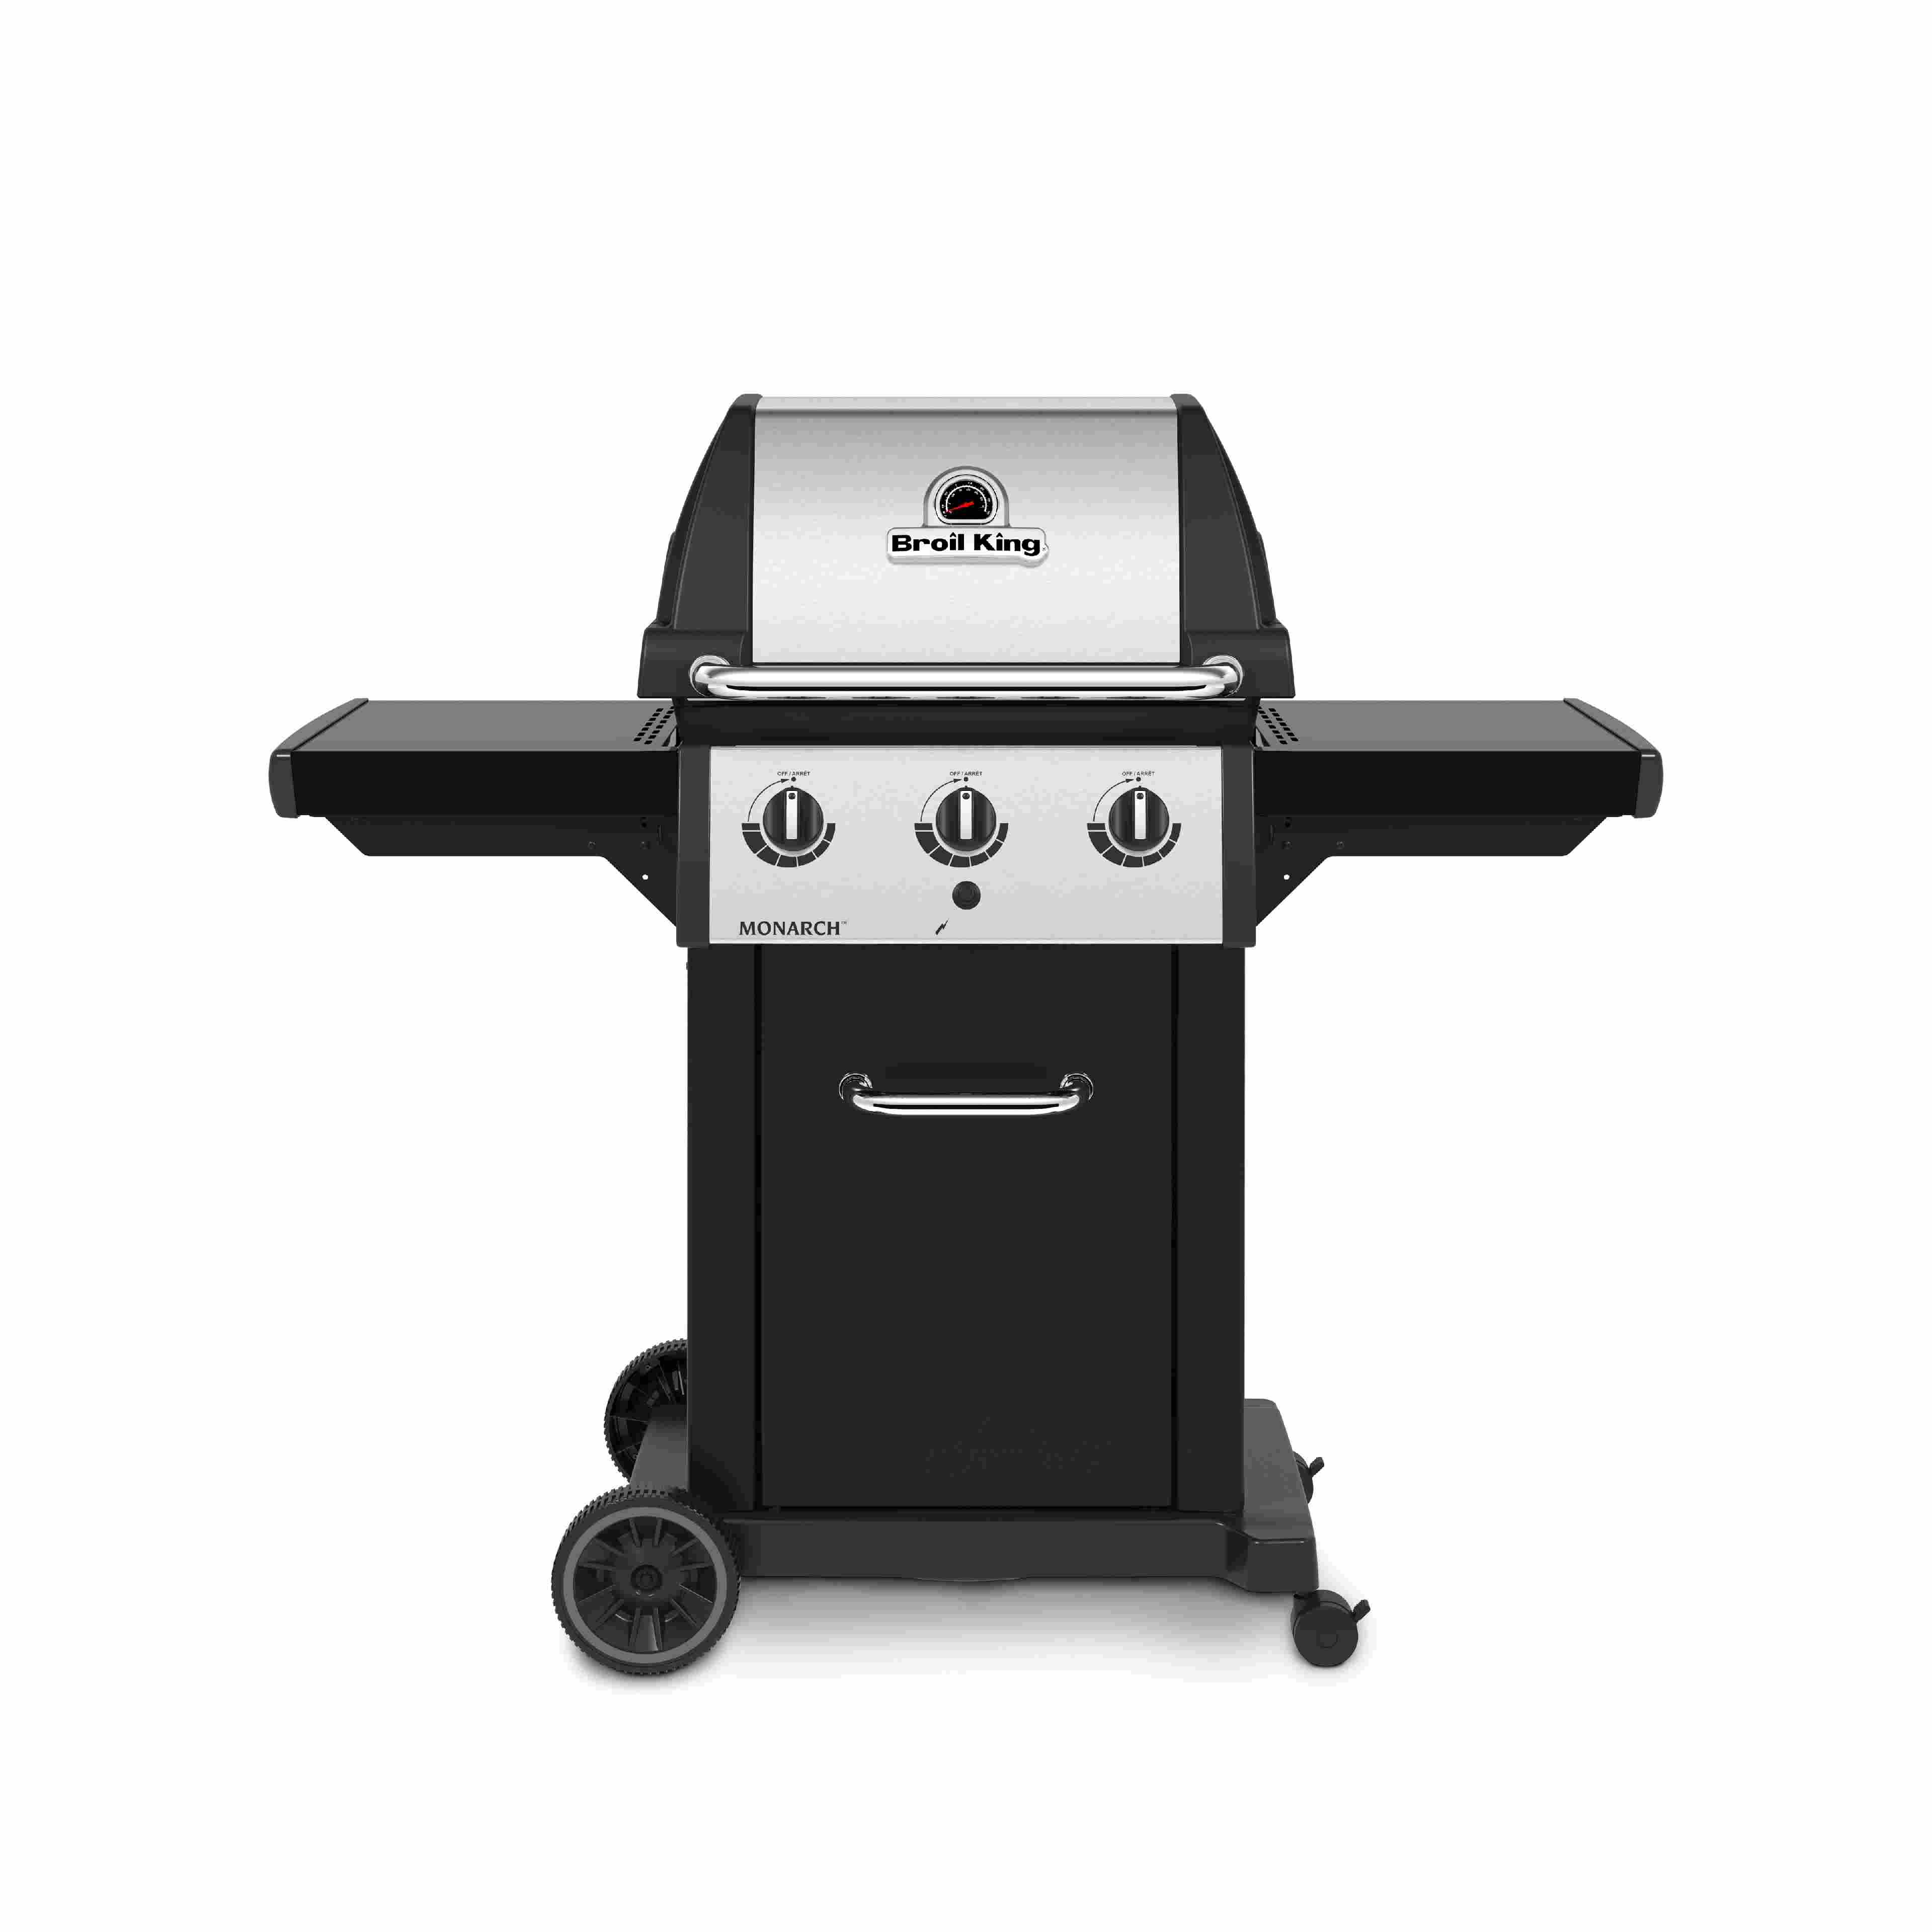 Broil King Grill